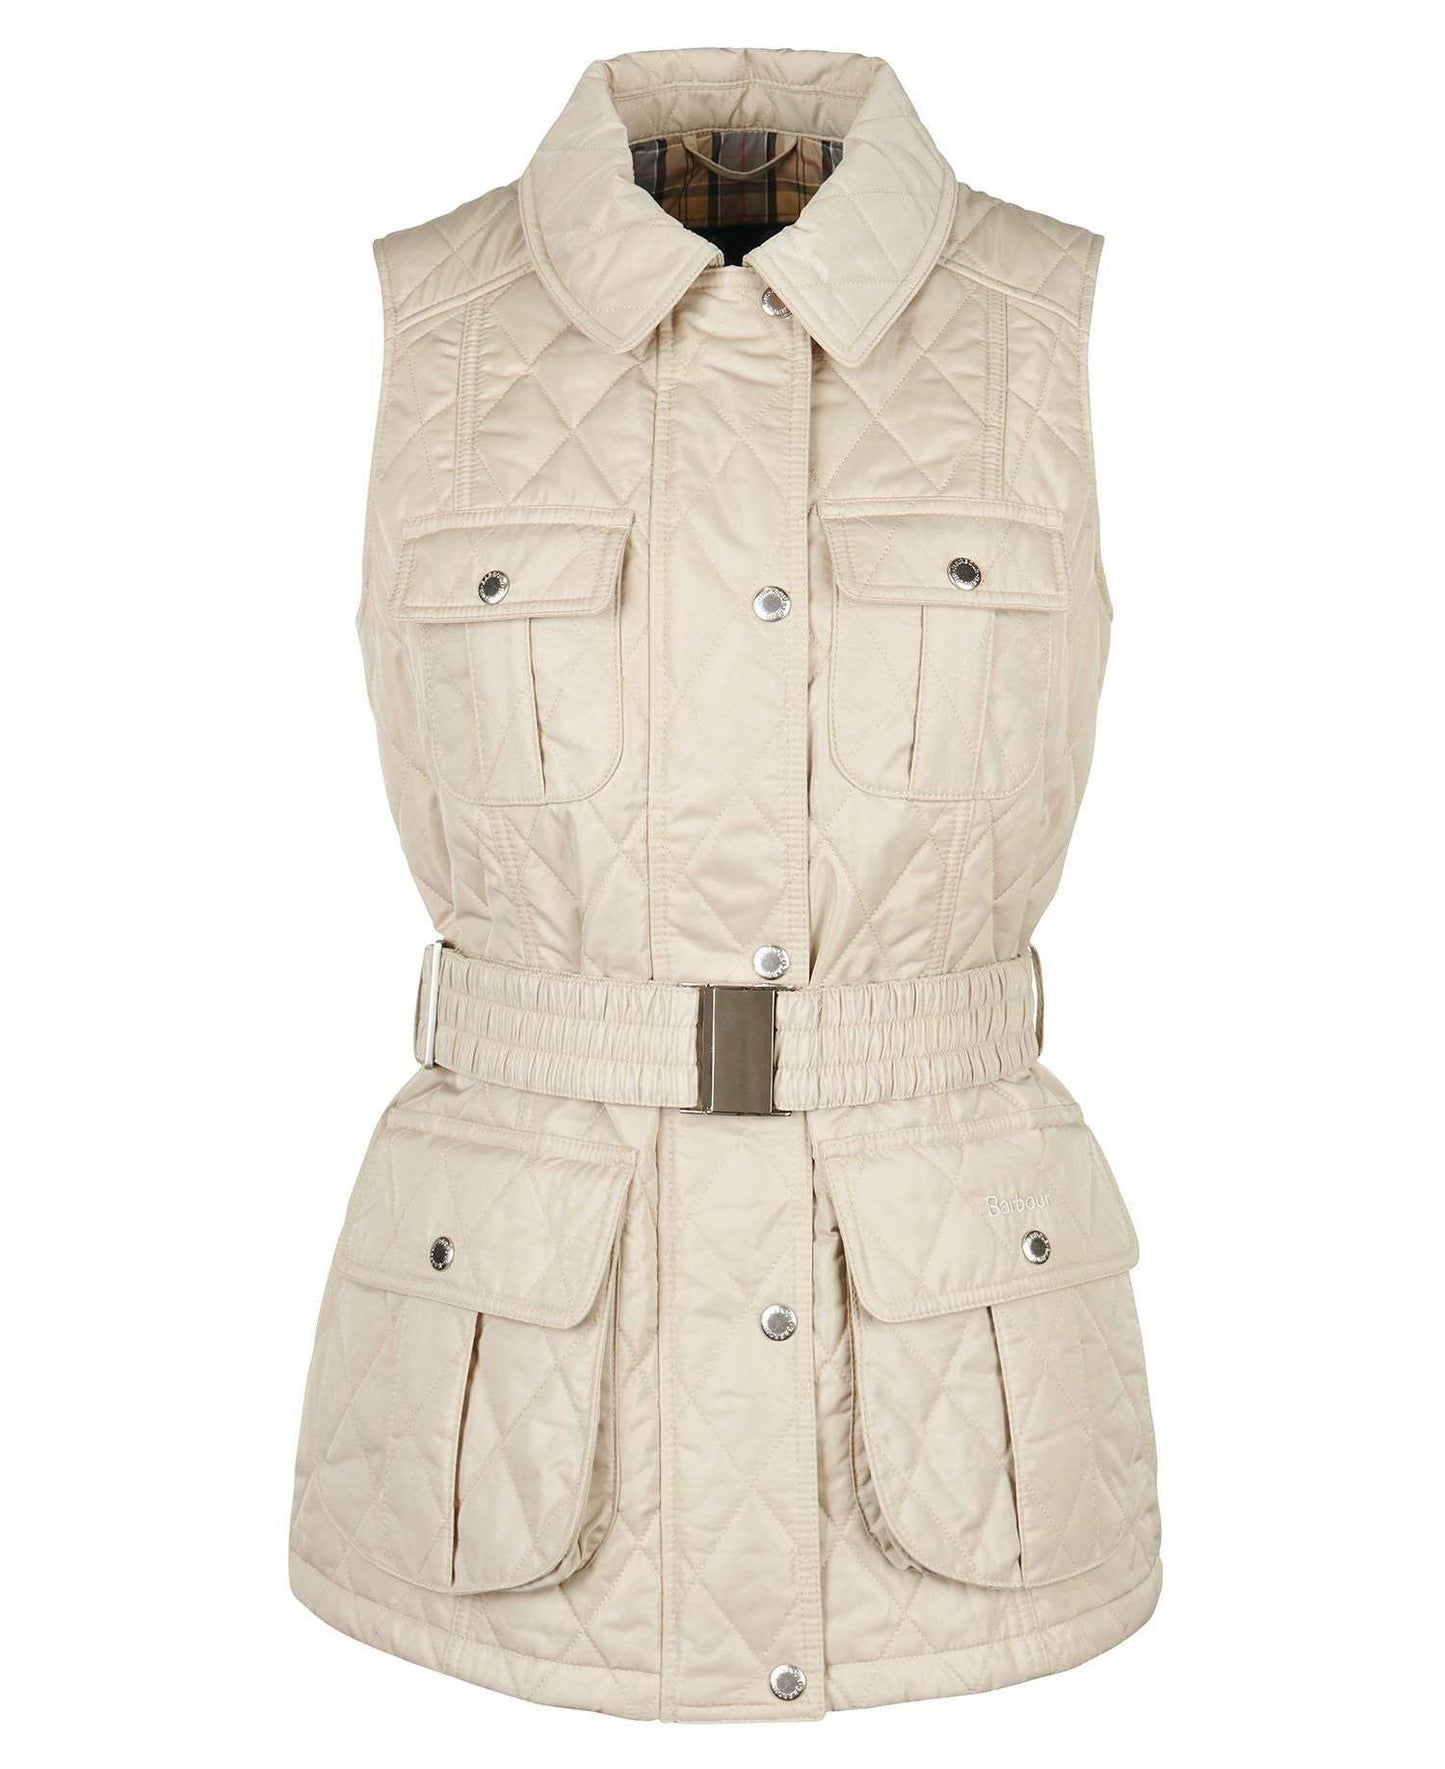 Barbour Belted Defence Gilet - The Luxury Promotional Gifts Company Limited